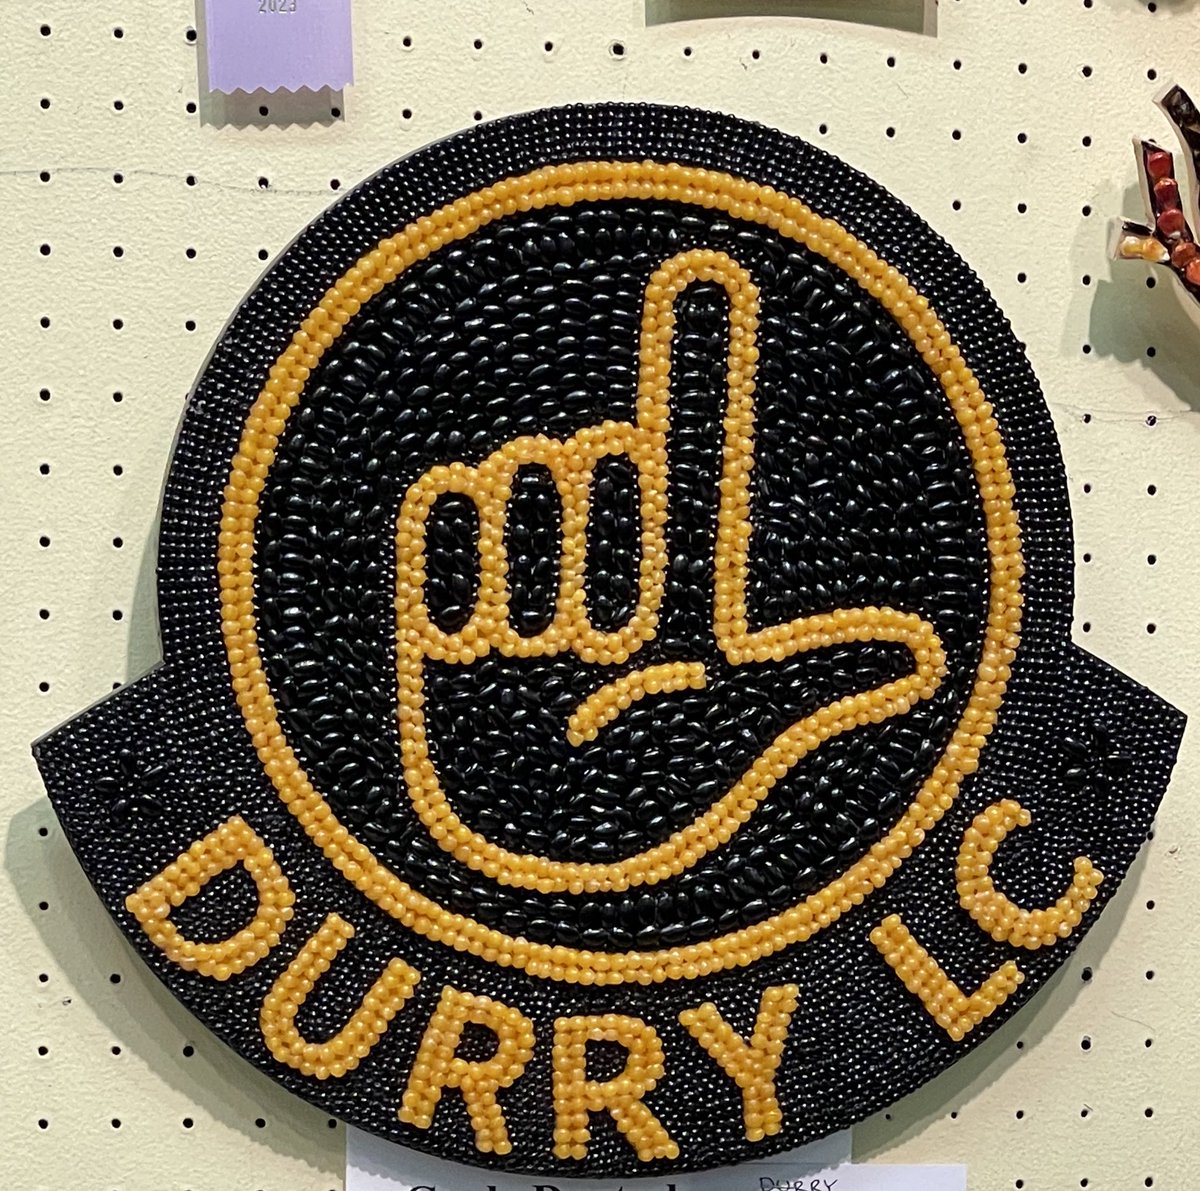 Here’s the second piece of crop art I submitted to the MN State Fair. This is for one of my fav local bands @Durrymusic ! 

#cropart #seedart #durry #losersclub
#mnstatefair